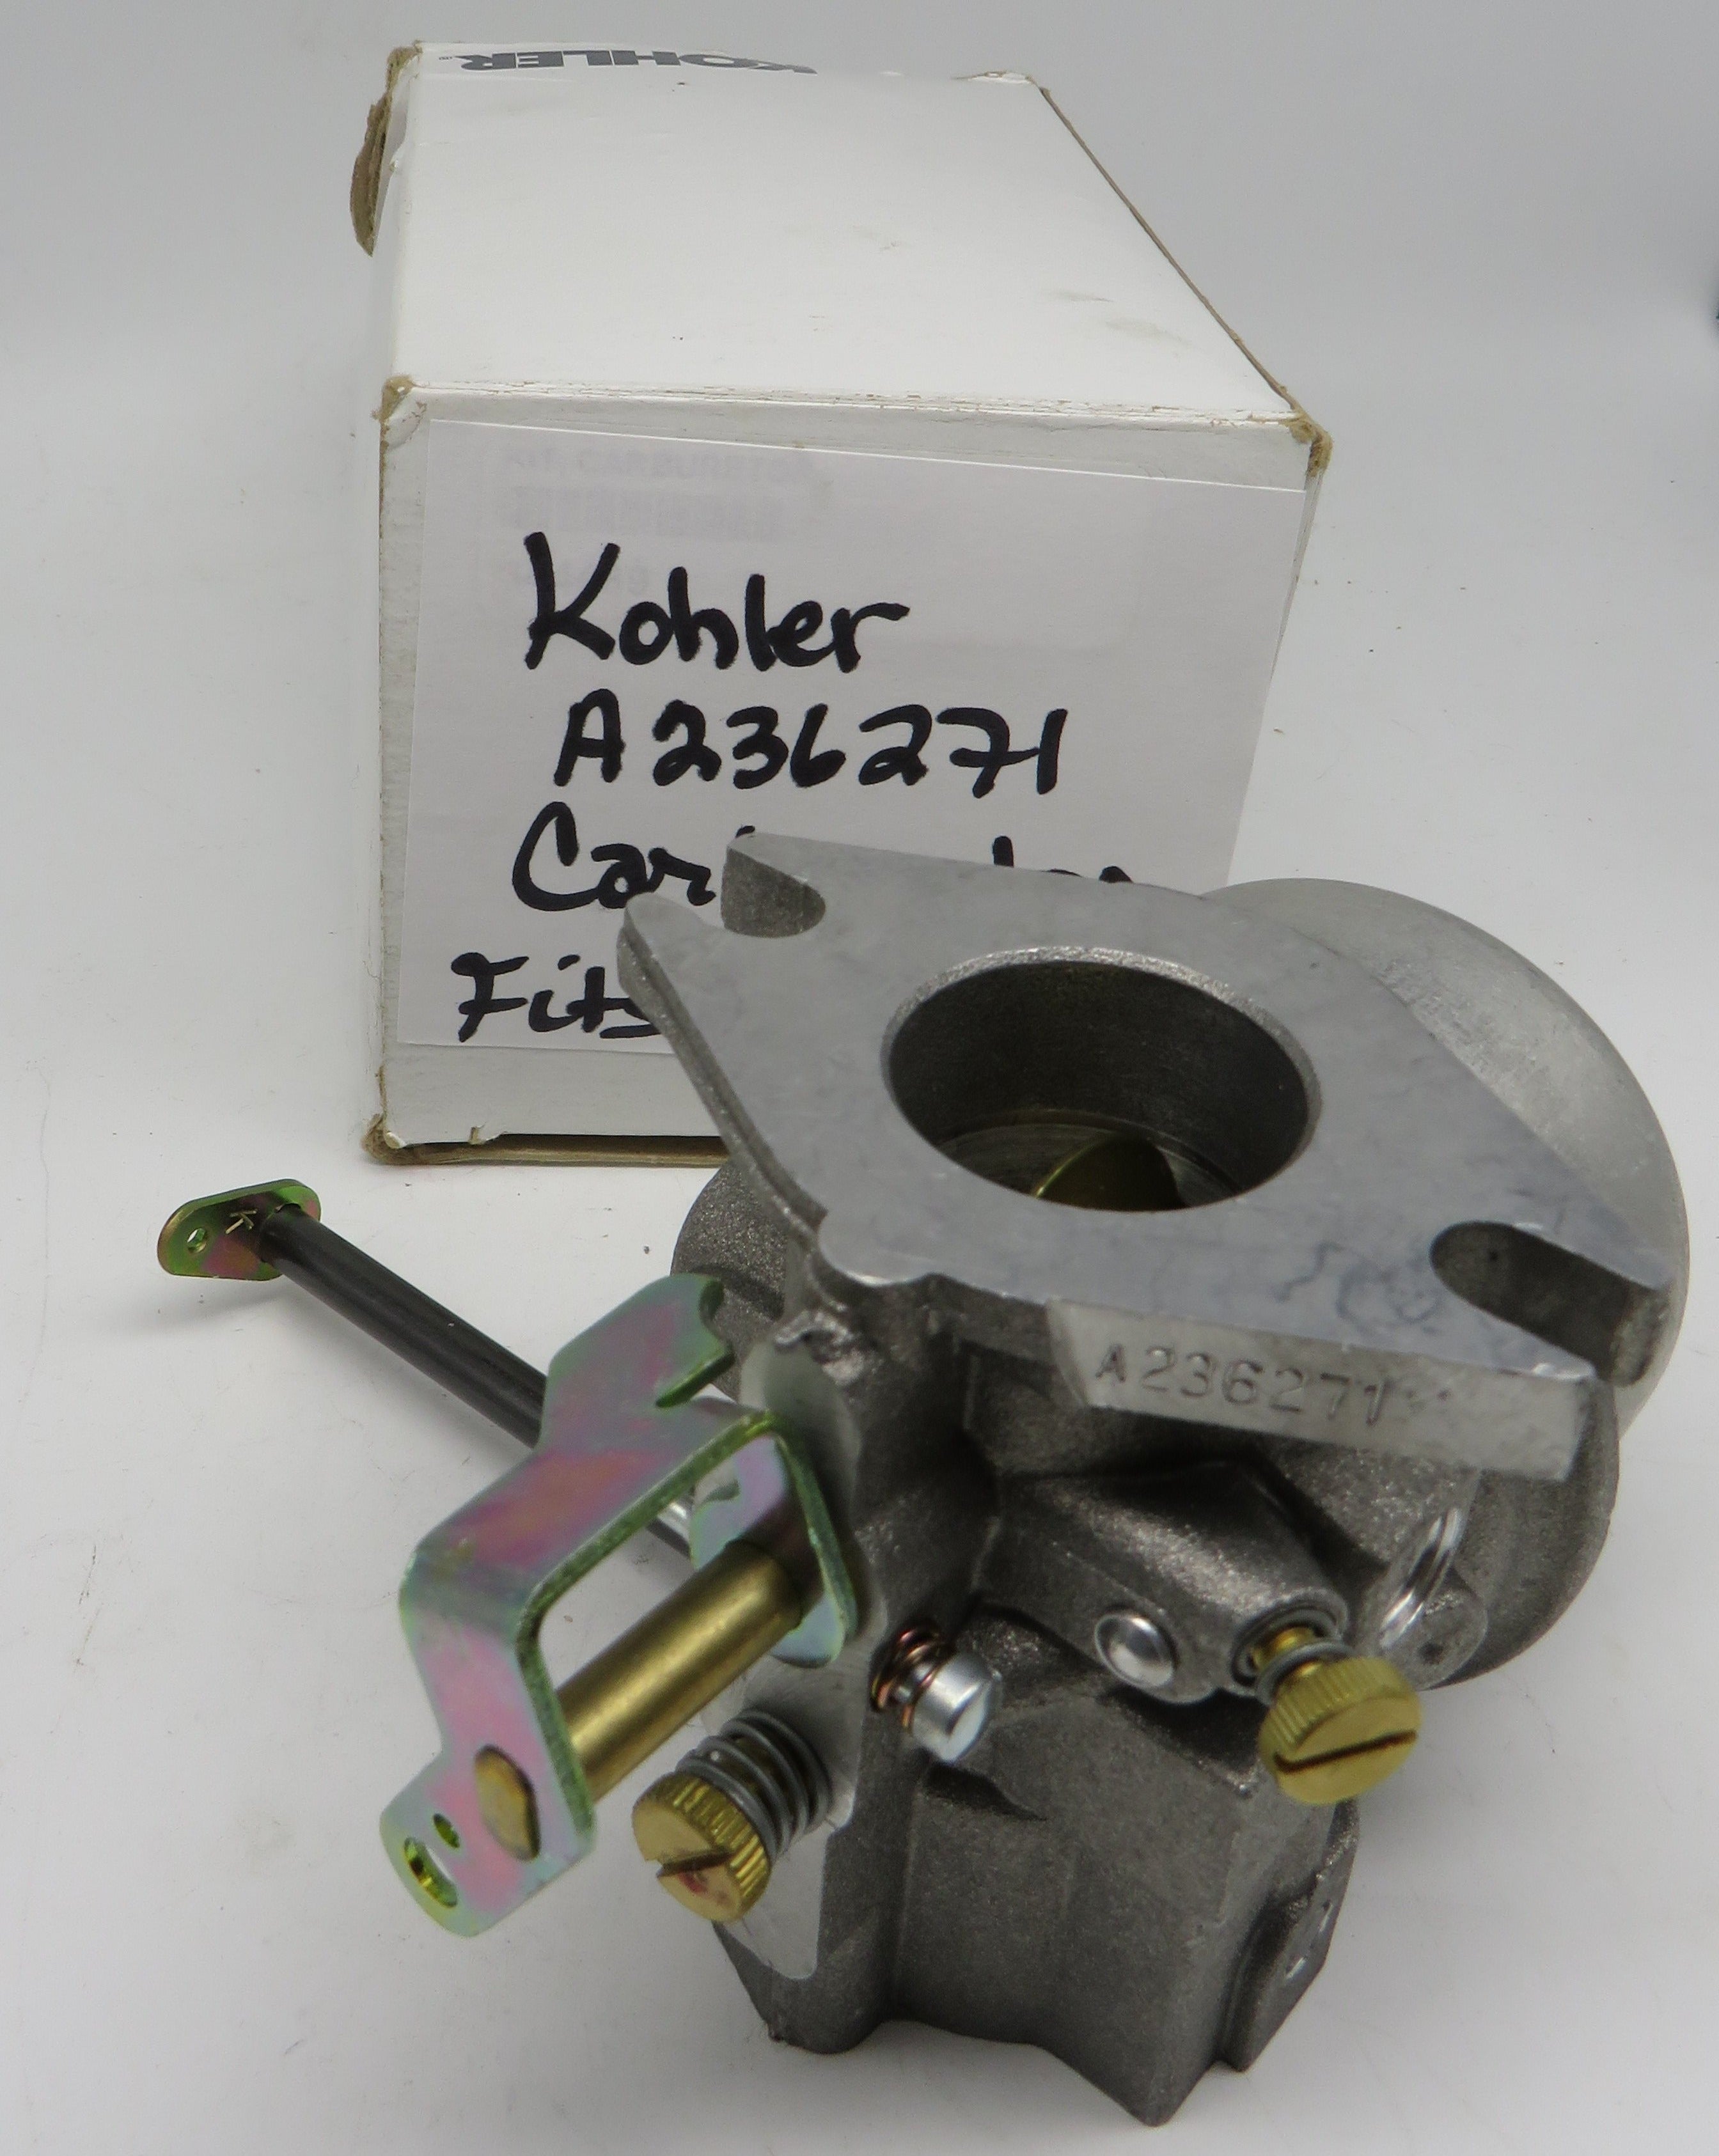 A236271 Kohler Carburetor Fits 5RMY OBSOLETE (Replaced by A236271S)